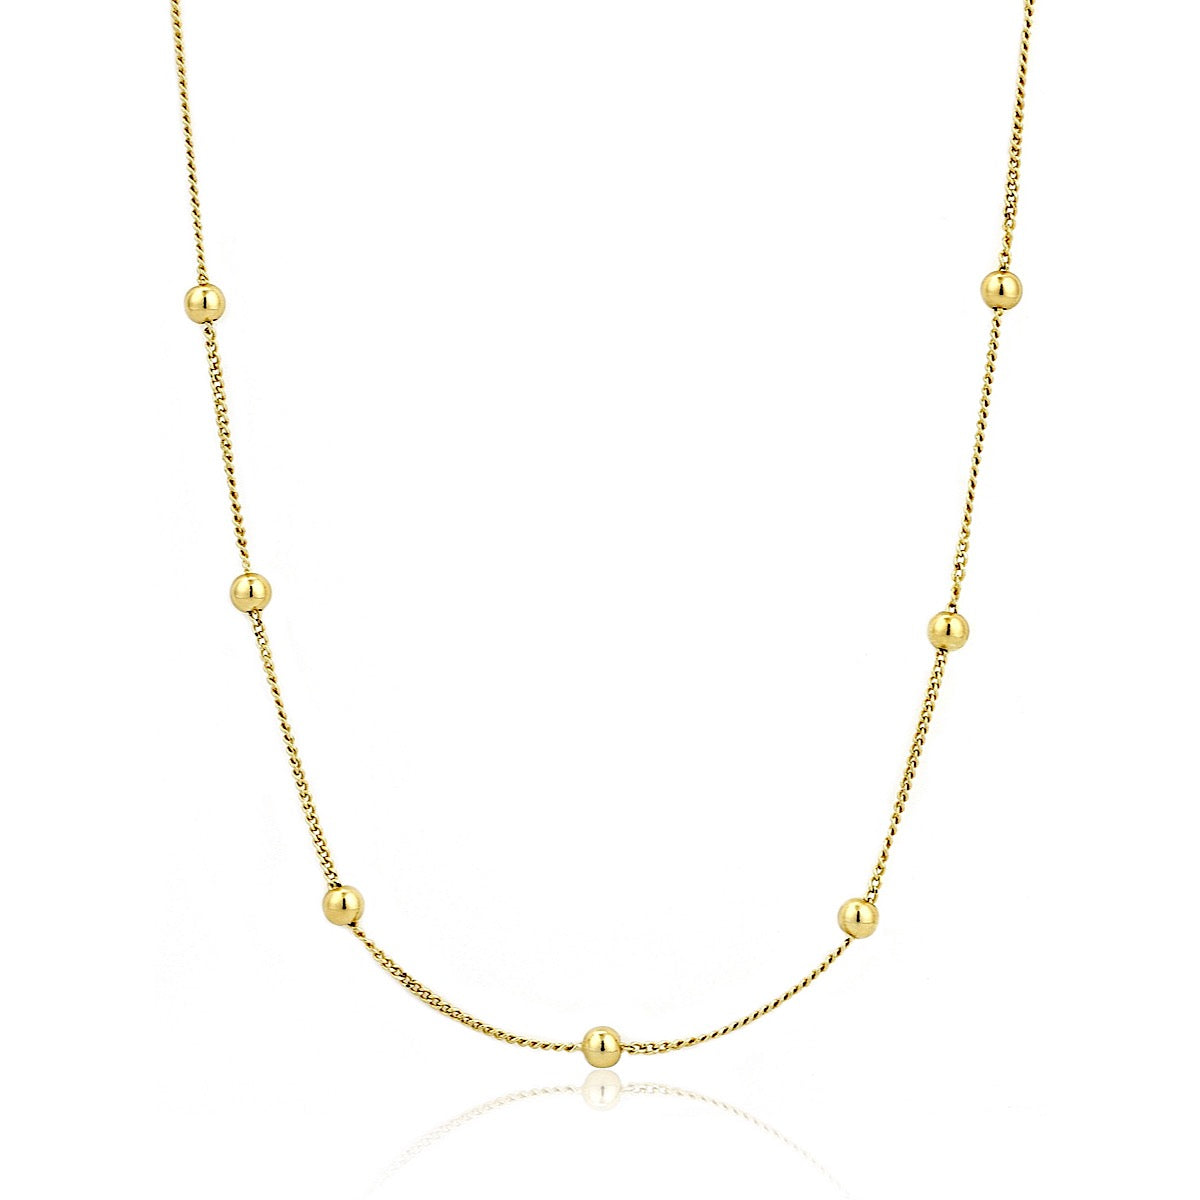 Ania Haie Gold Modern Beaded Necklace - More Than Just a Gift